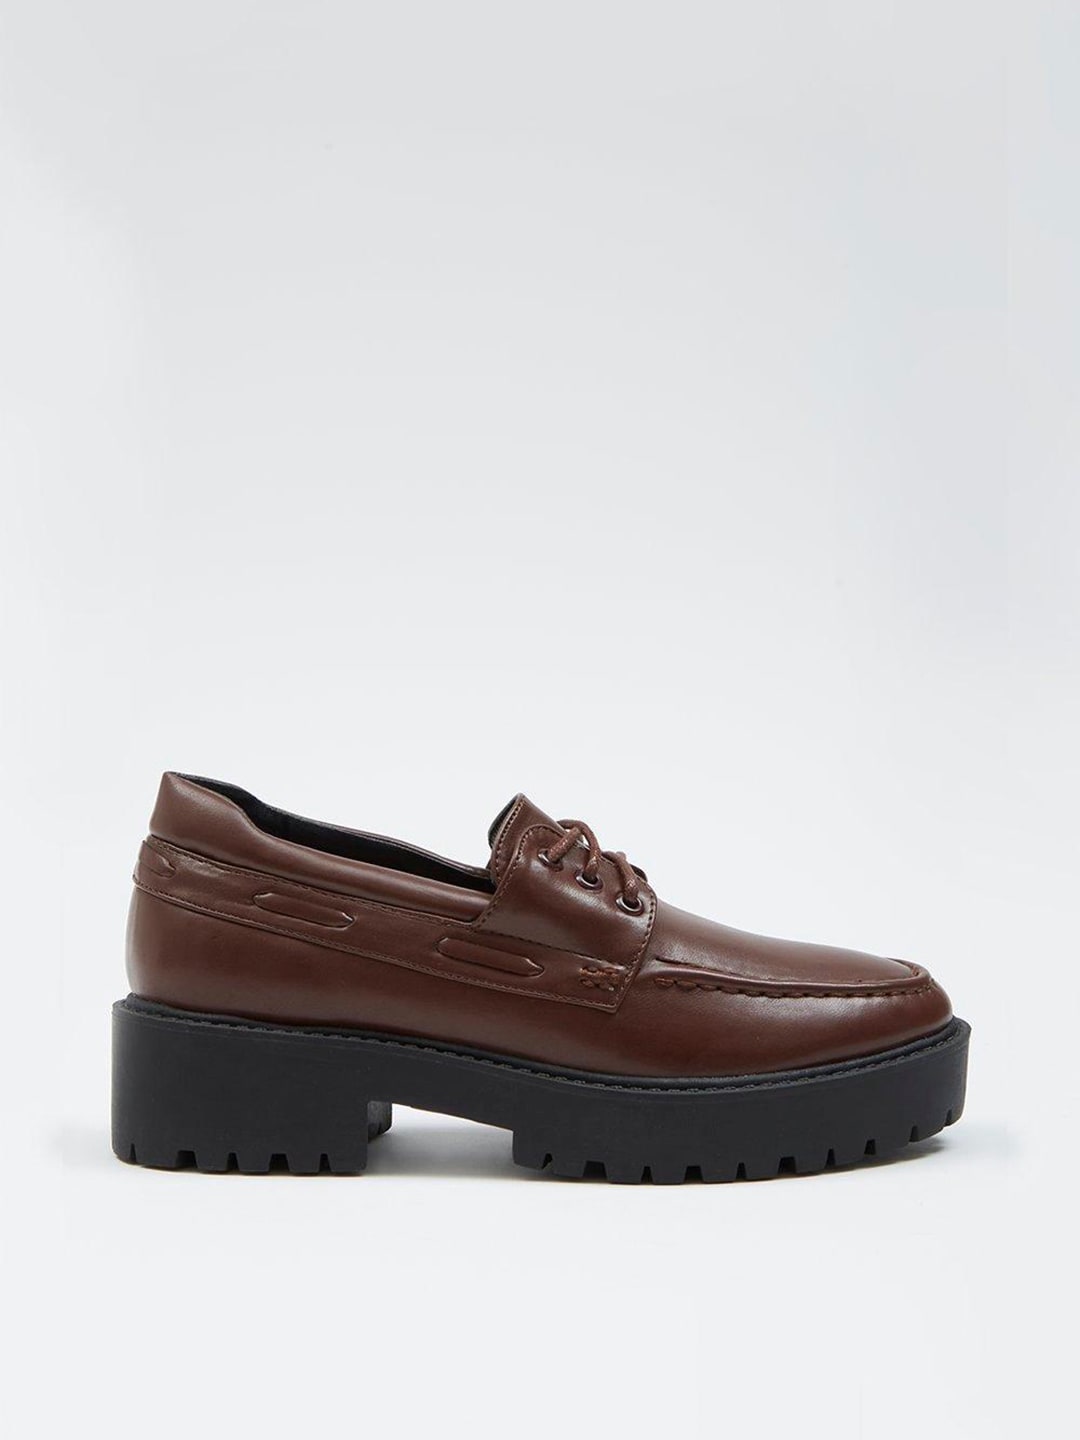 DOROTHY PERKINS Women Chunky Boat Shoes Price in India